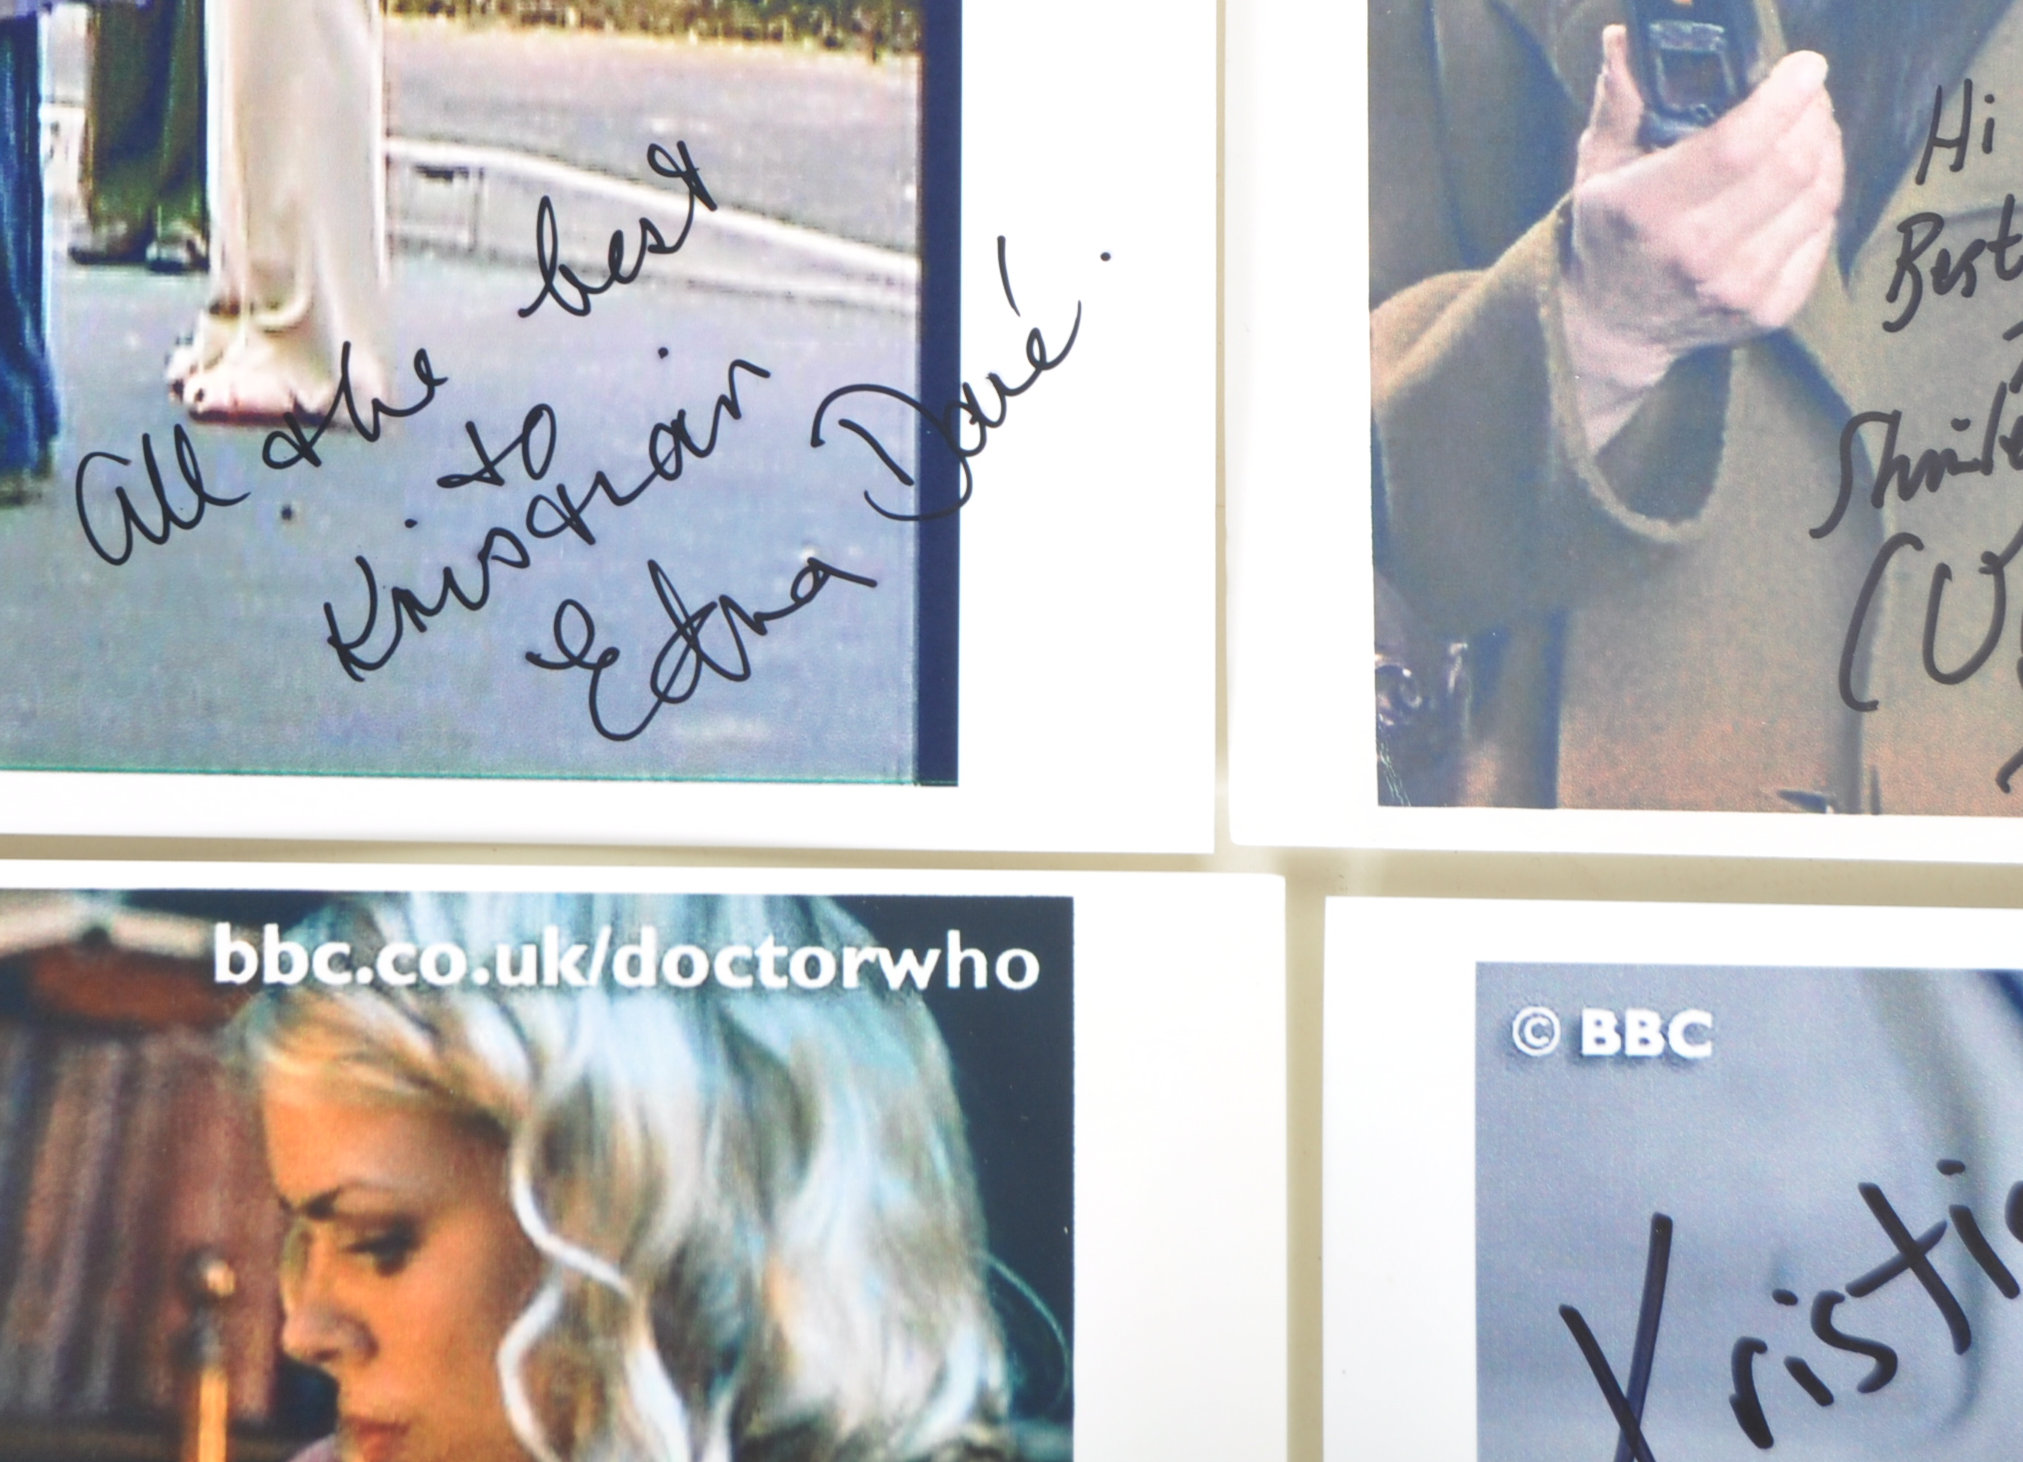 DOCTOR WHO - DAVID TENNANT ERA - AUTOGRAPH COLLECTION - Image 11 of 15